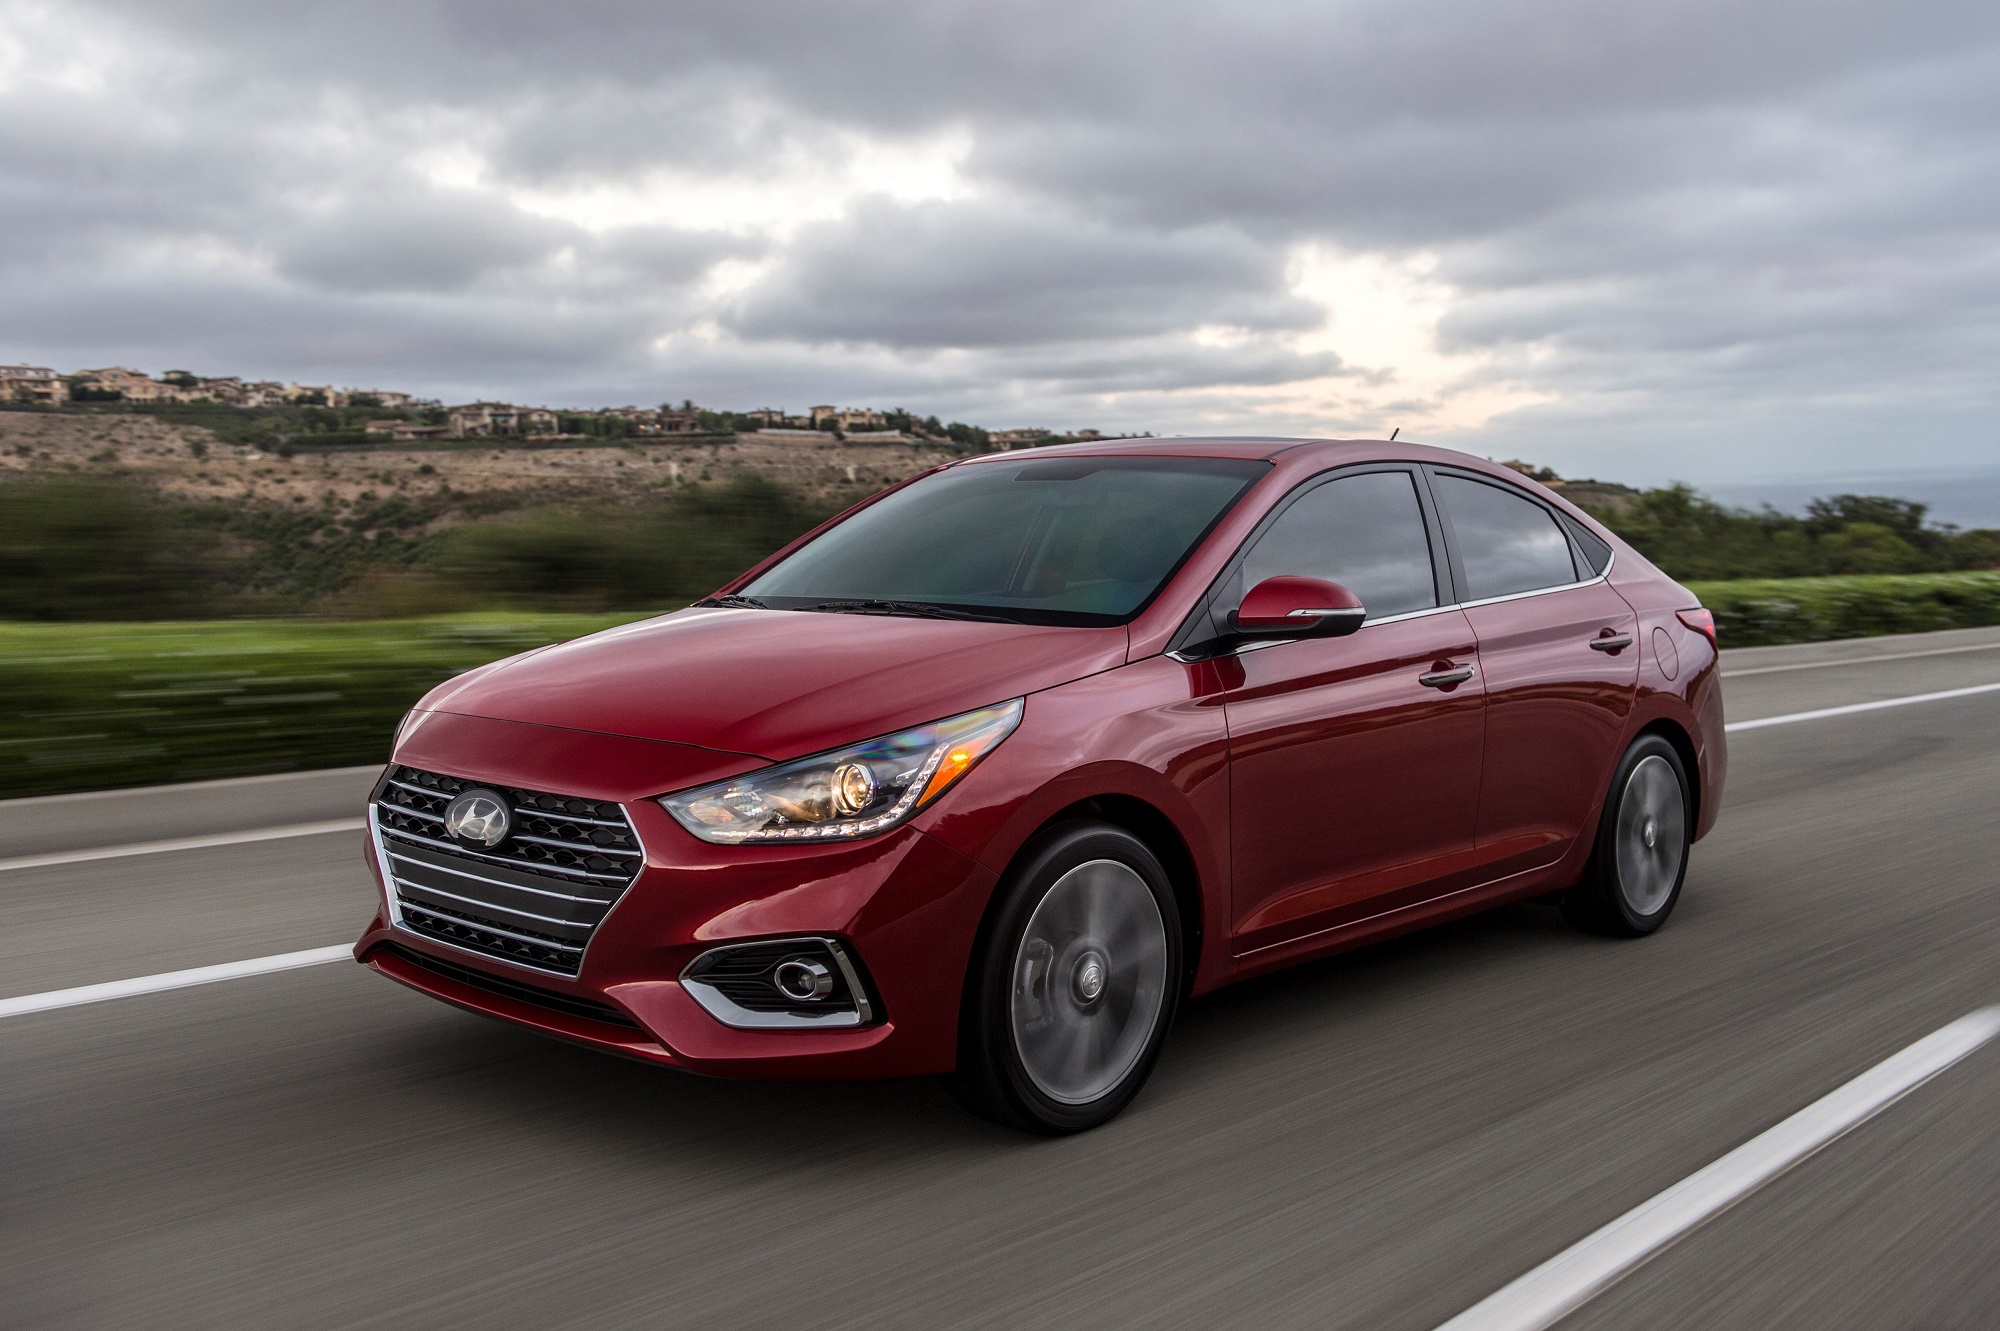 The Hyundai Accent, like the Chevy Spark, is being discontinued by 2023.